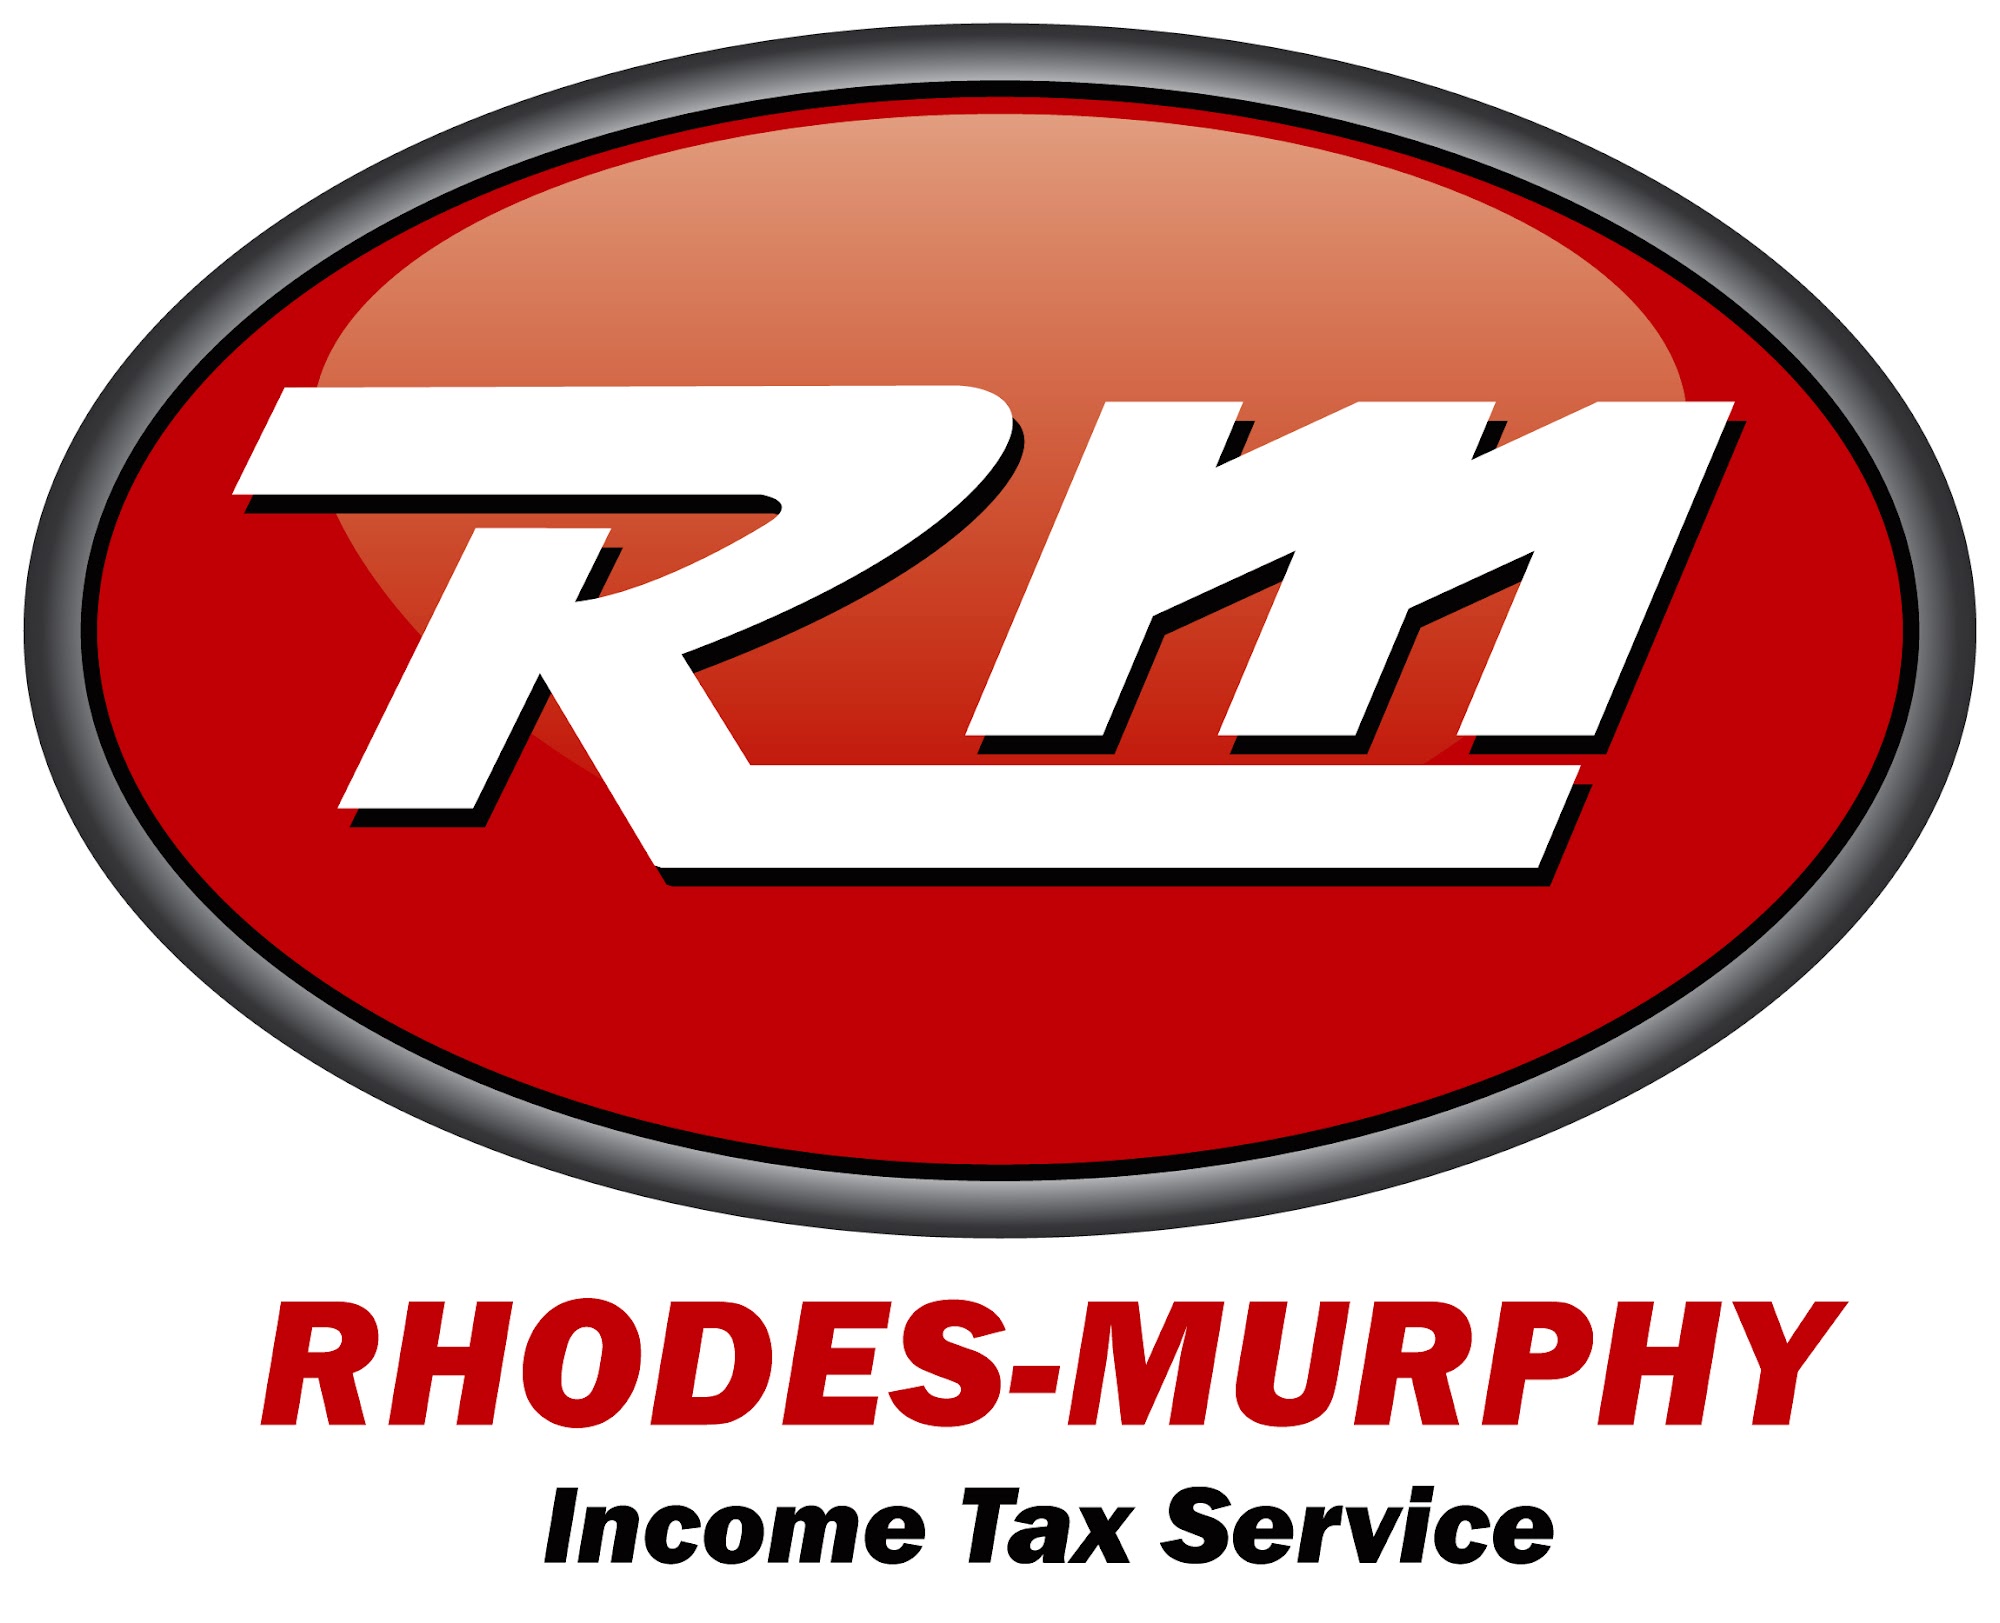 Rhodes-Murphy Income Tax Services